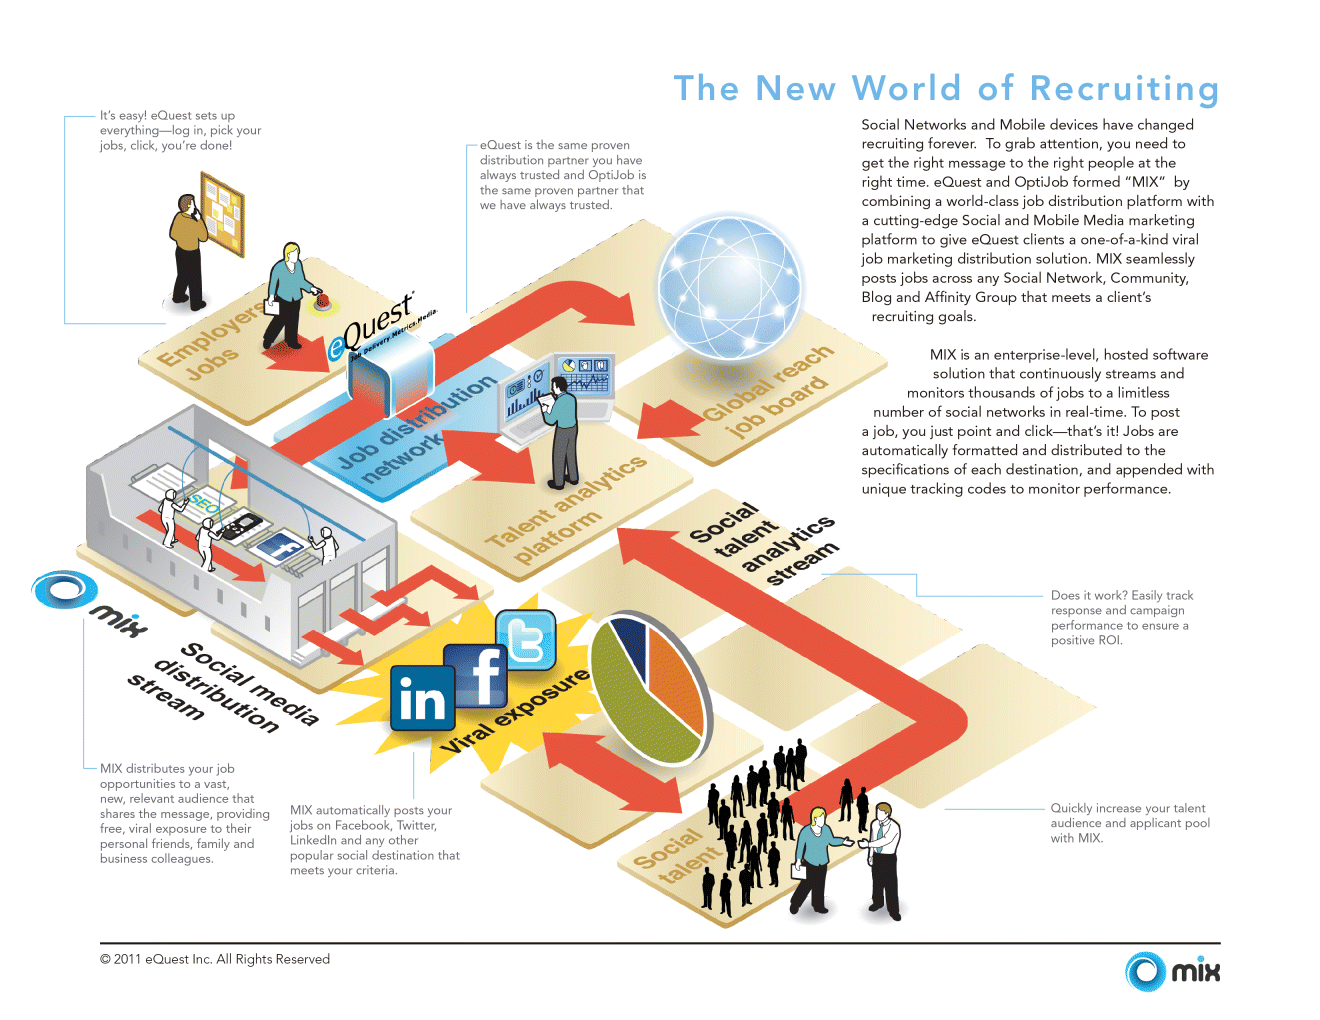 Figure depicting an infographic for the new world of recruiting through social networks and mobile devices. The visual represents the launching of a new social and mobile networking platform by a leading job distribution platform.